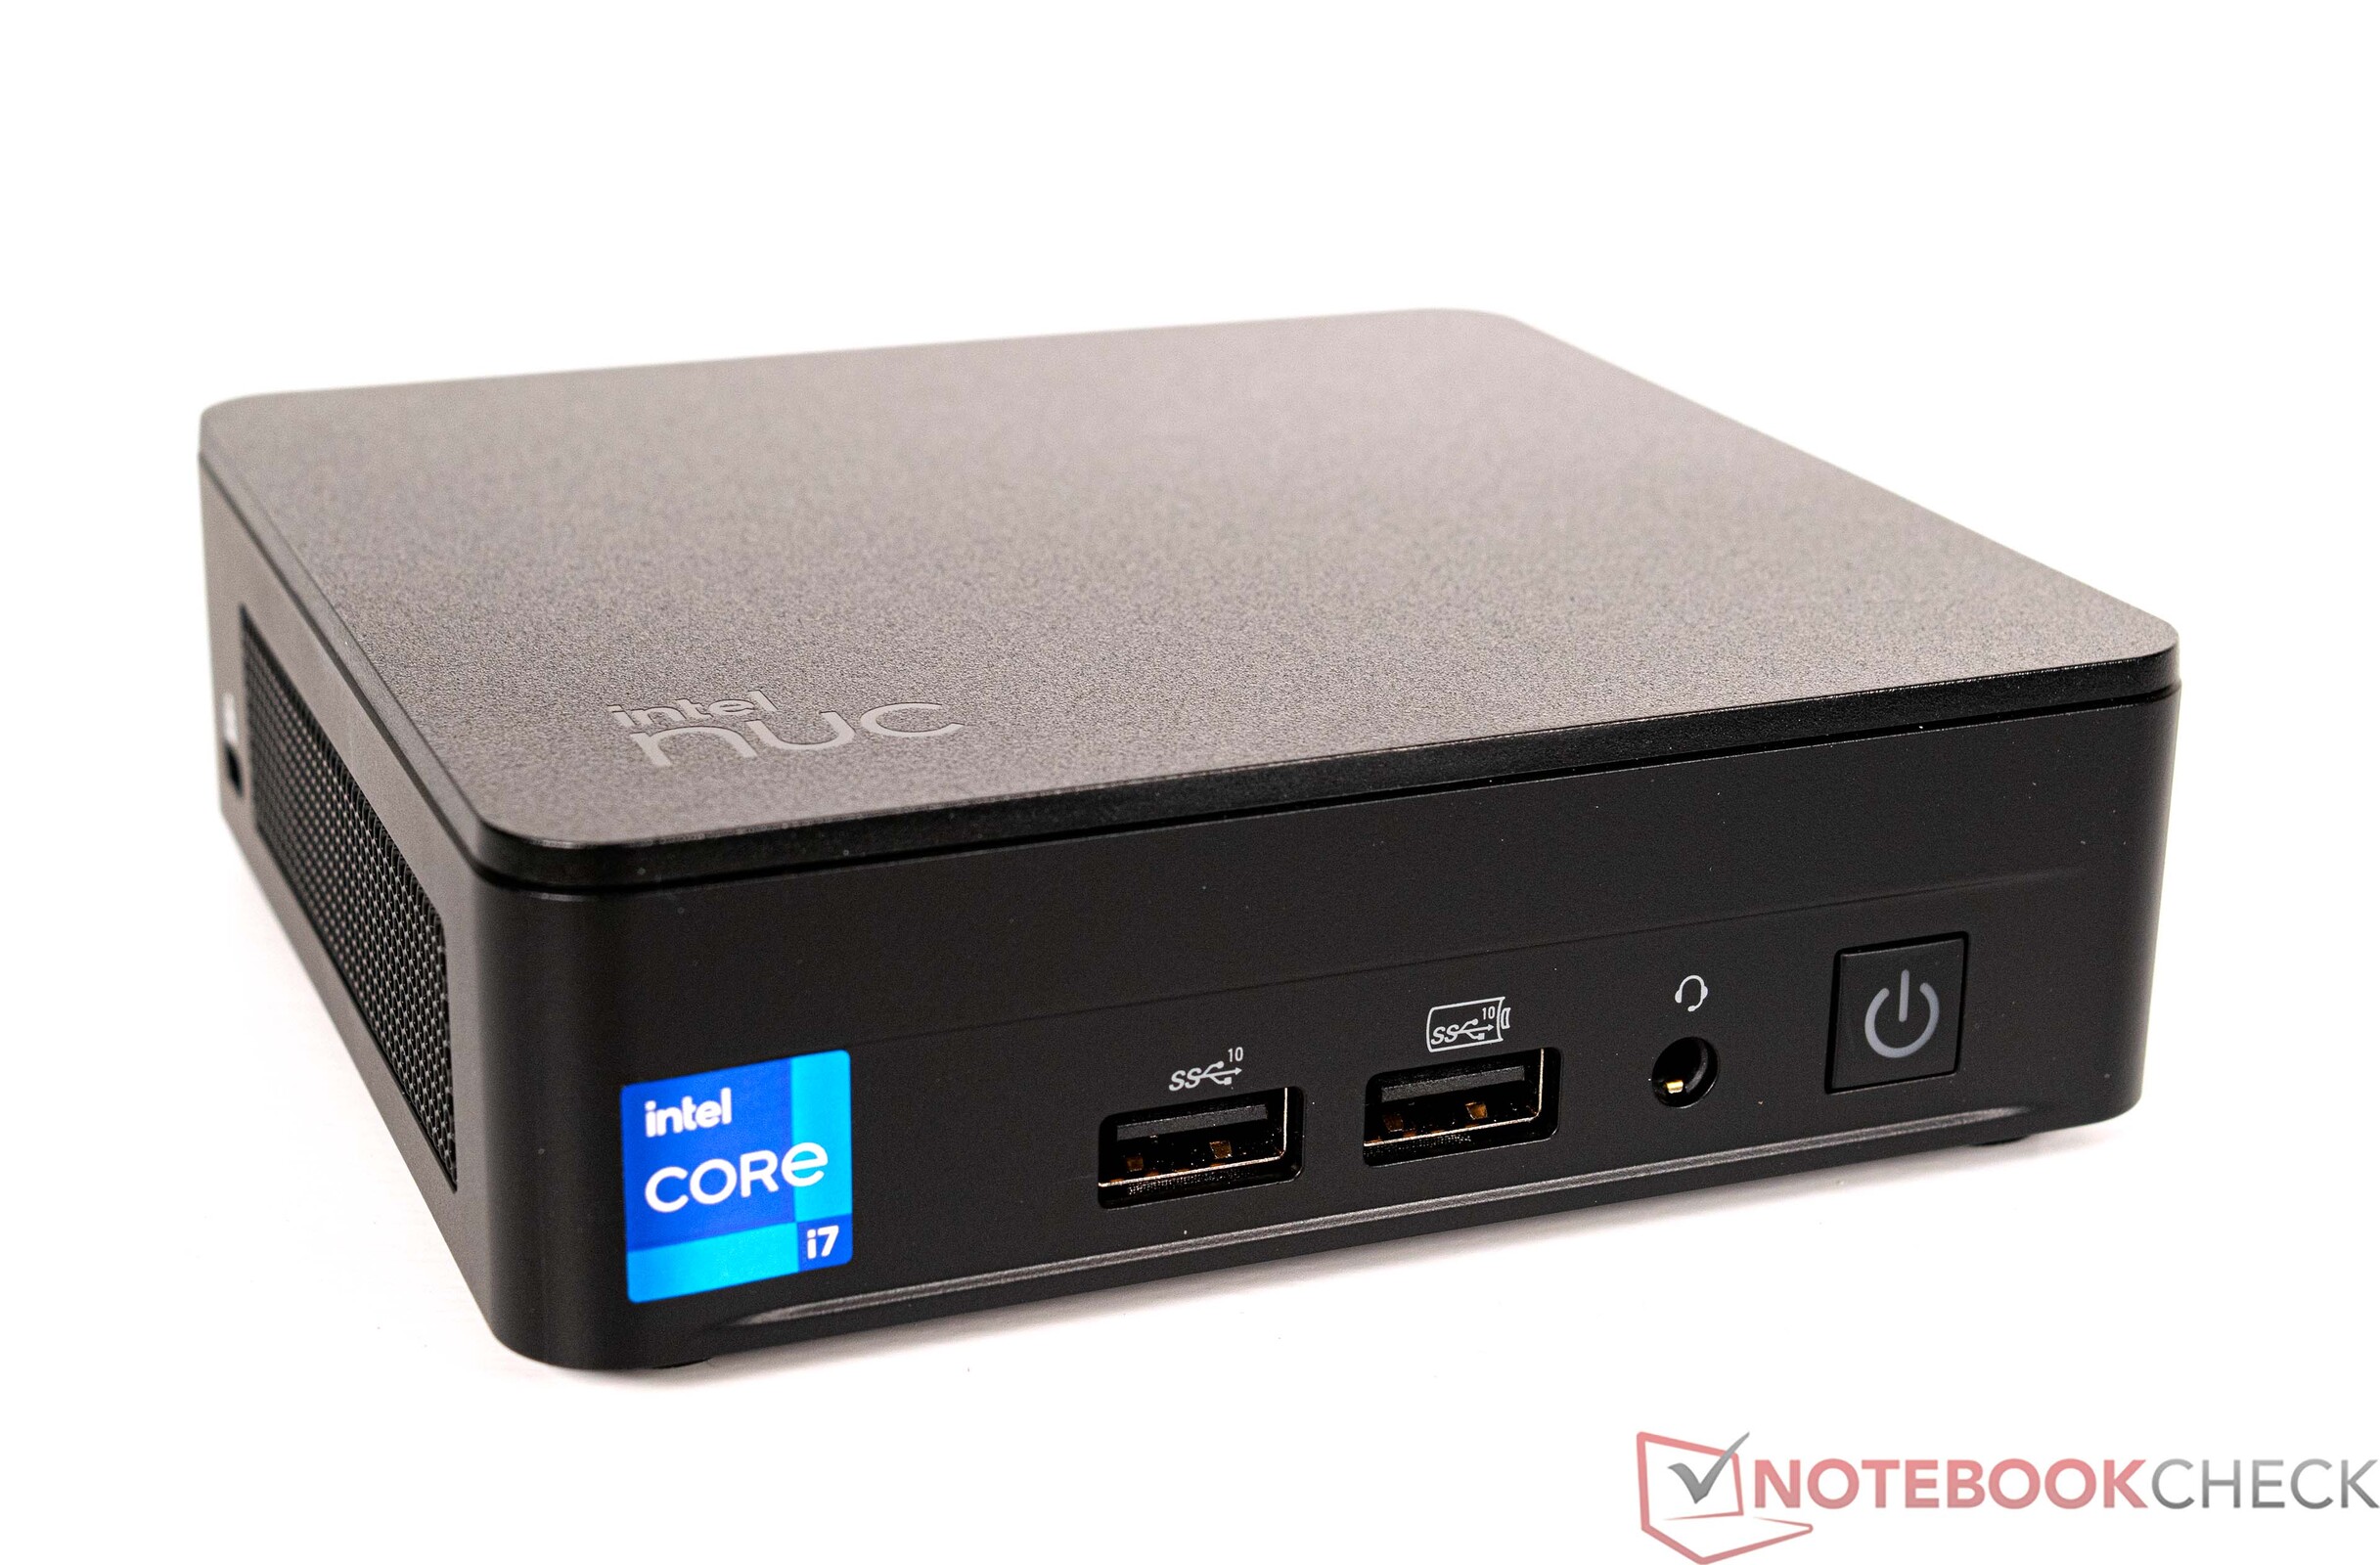 Intel NUC 13 Pro launches with up to 64 GB RAM, twin Thunderbolt 4